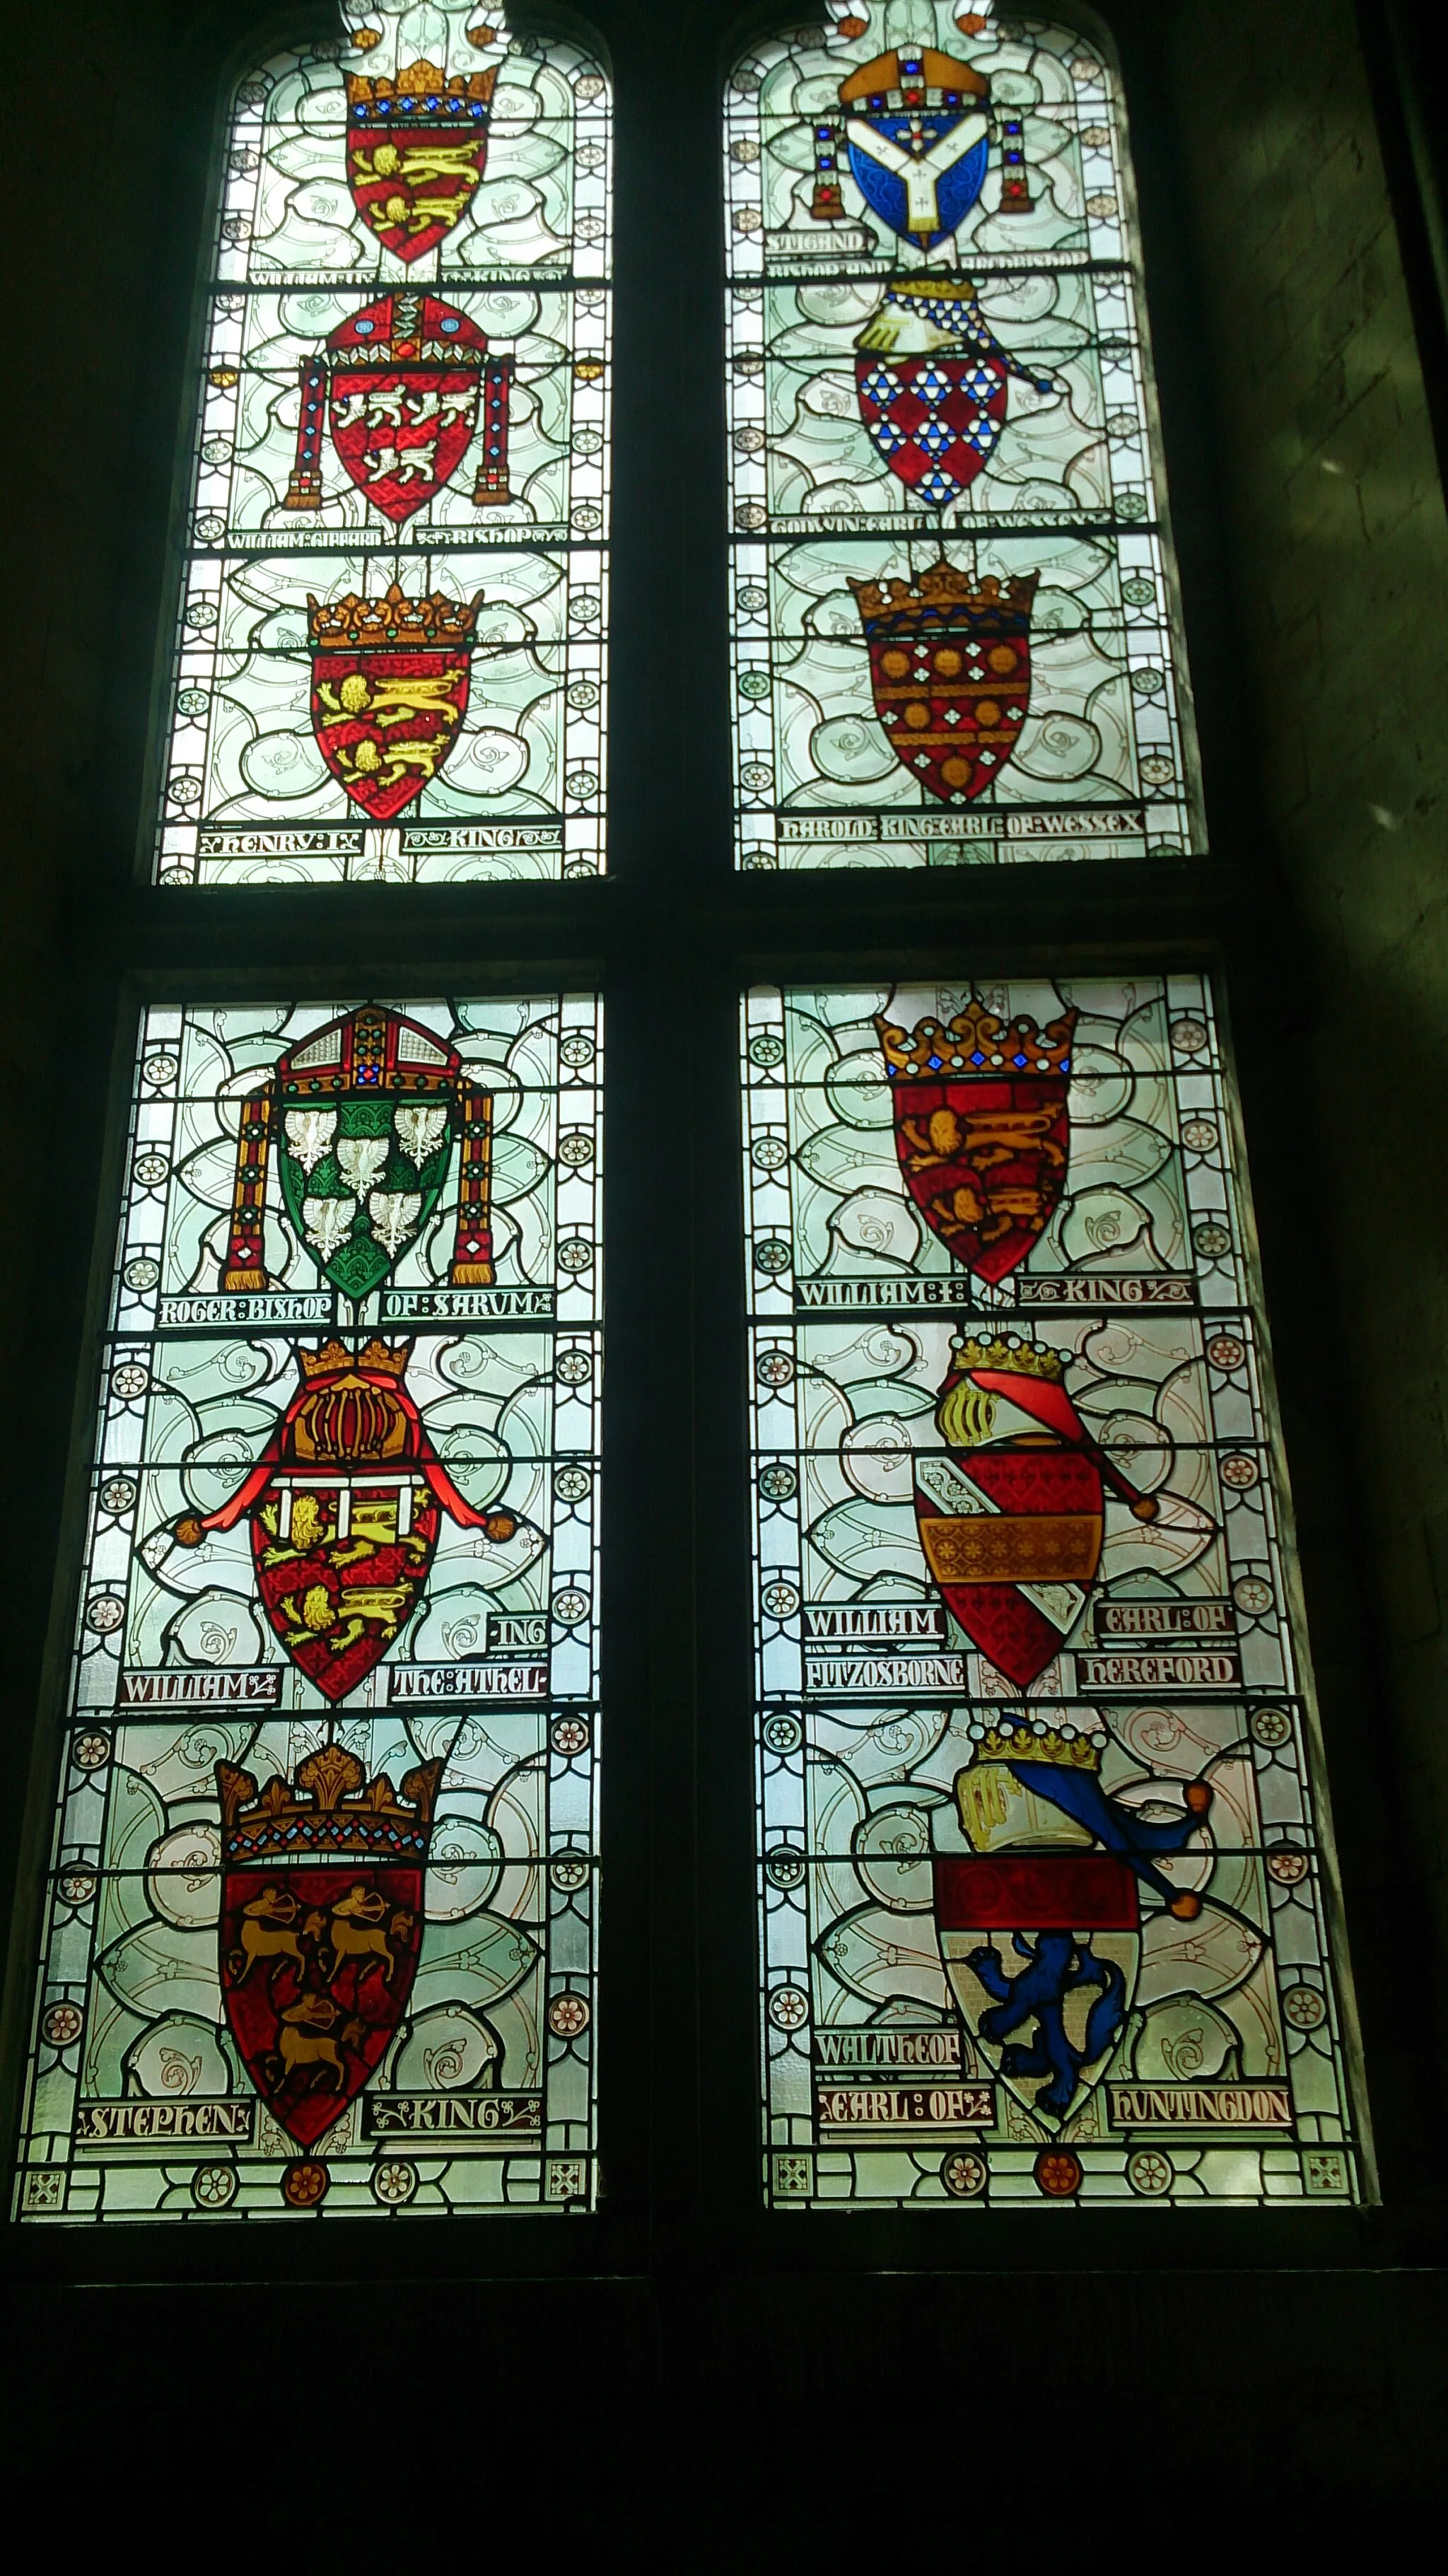 Photo showing: The 2nd window in Winchester Great Hall, representing
William II of England: Gules two leopards Or
Stigand: Azure a stole argent per pall with crosses sable fringed Or over a cross flory argent pierced gules on a staff Or
William Giffard: Gules three lions passant argent langued azure
Godwin, Earl of Wessex: Lozengy gules and vair
Henry I of England: Gules two leopards Or
Harold Godwinson: Gules two bars Or between 10 crosses floretty (4-3-3) argent and 6 bear's heads afronty Or
Roger of Salisbury: Vert five eagles argent
William the Conqueror: Gules two leopards Or
William Adelin: Gules two leopards Or, labelled argent
William FitzOsbern, 1st Earl of Hereford: Gules a bend argent, overall a bar Or
Stephen, King of England: Gules three centaurs regardant Or with bows nooked of the same
Waltheof, Earl of Huntingdon and Northumbria: Argent a lion azure, with a chief gules